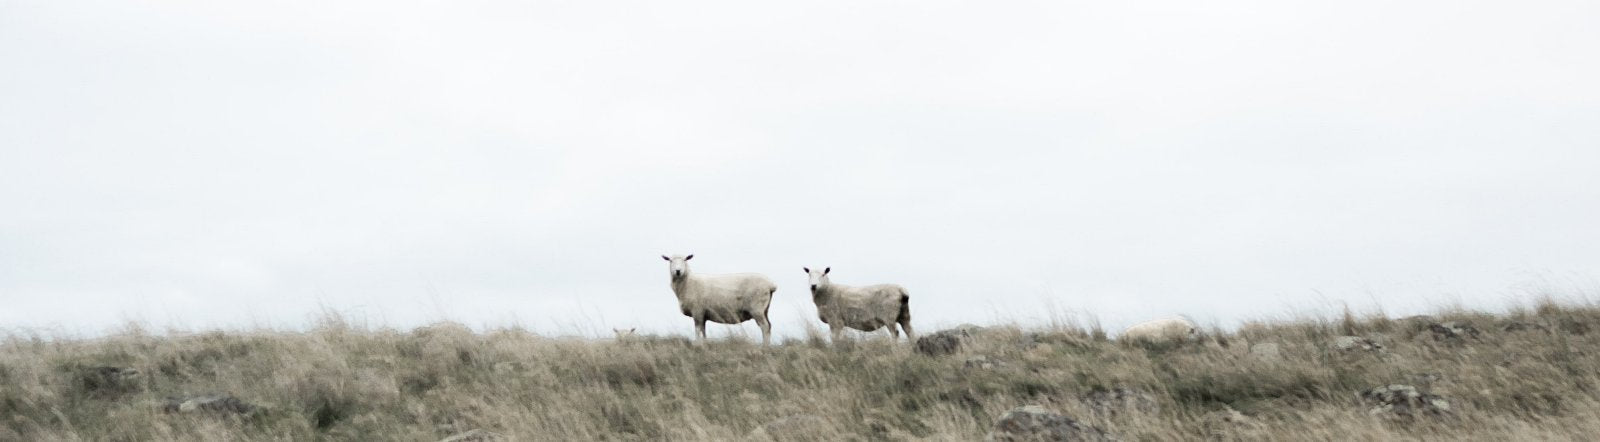 Image of two sheep in a field